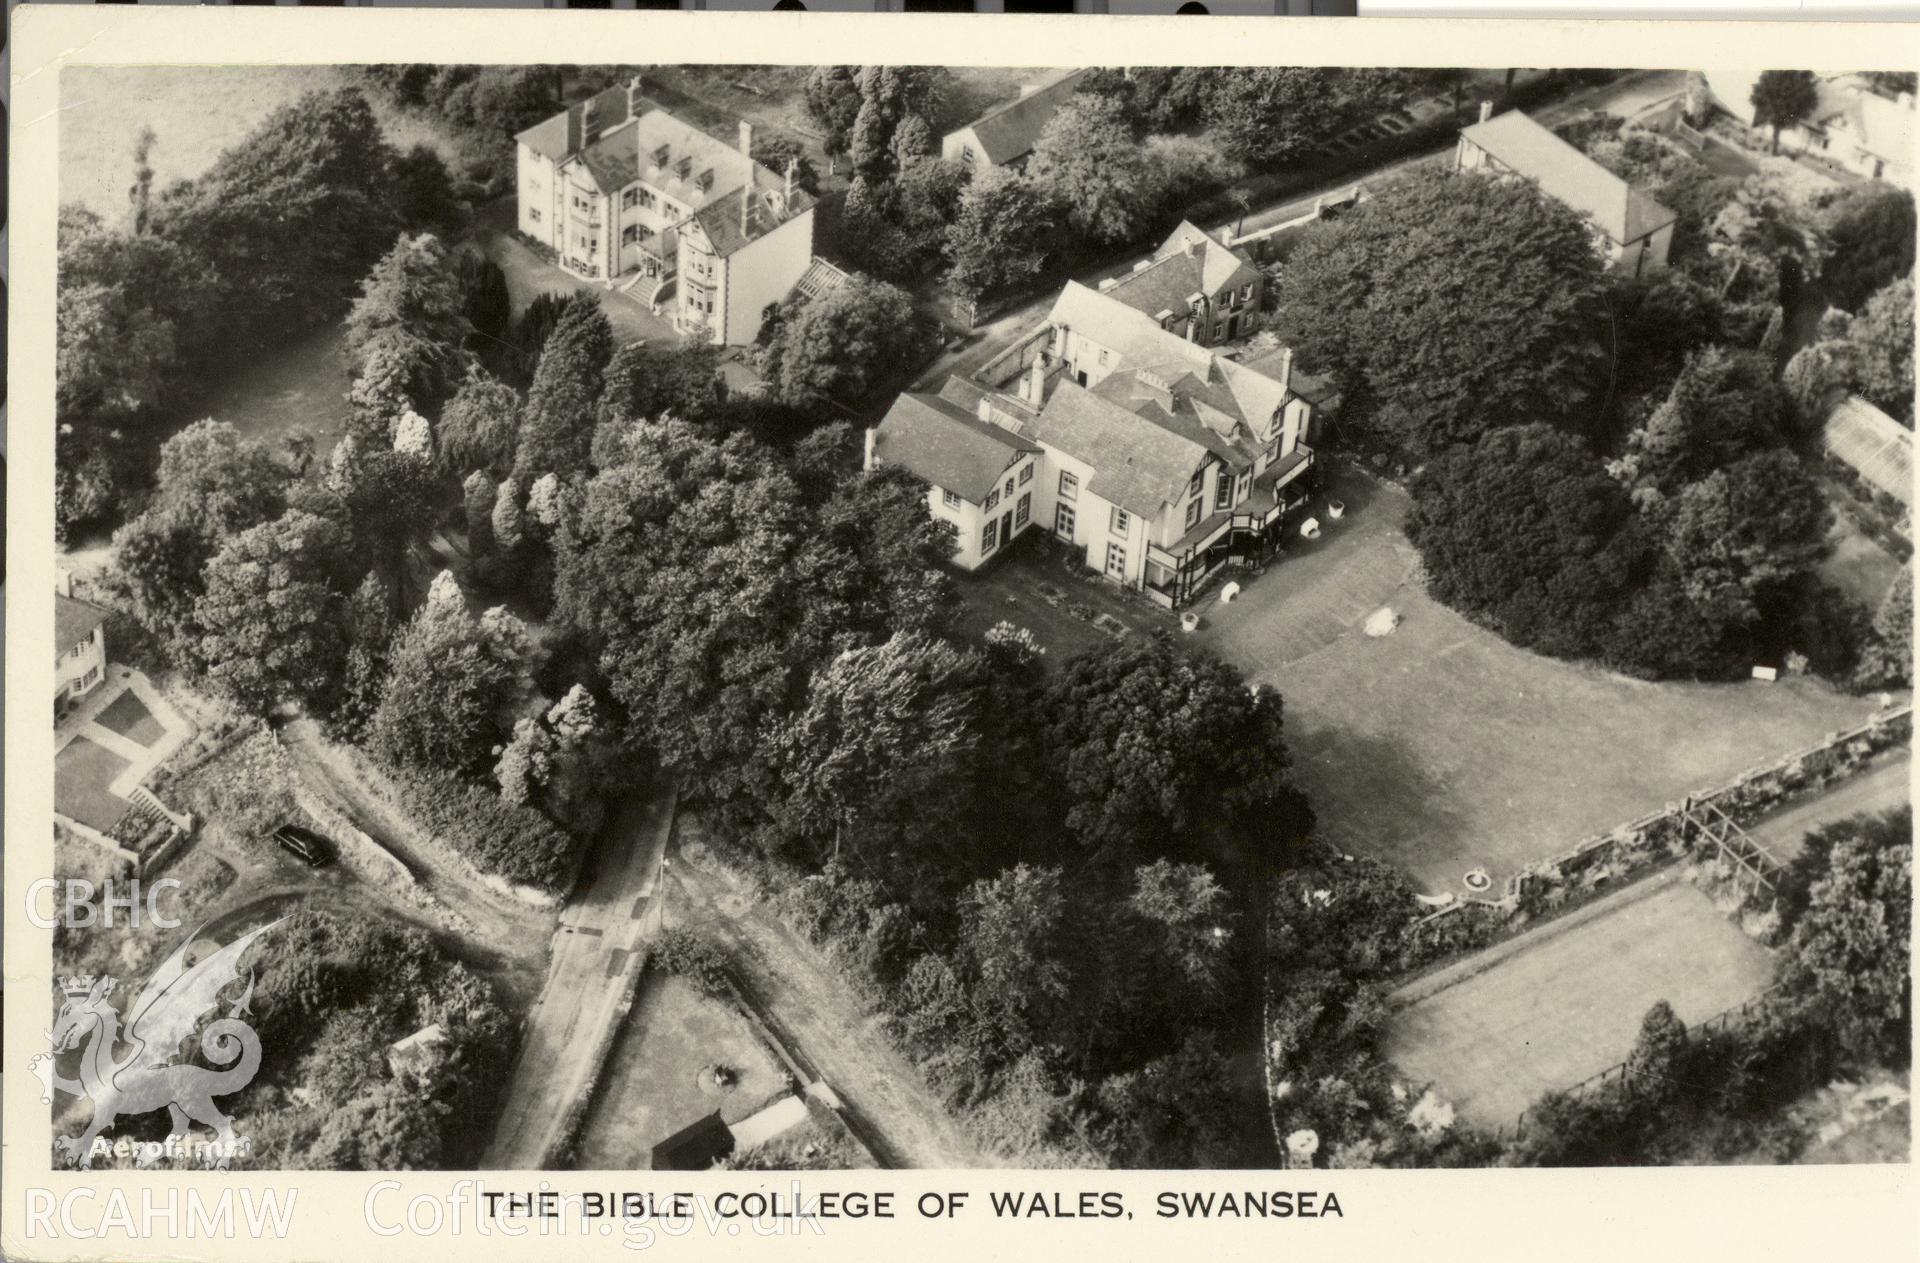 Digitised postcard image of aerial view of the Bible College of Wales, Swansea, Aerofilms and Aeropictorial Ltd. Produced by Parks and Gardens Data Services, from an original item in the Peter Davis Collection at Parks and Gardens UK. We hold only web-resolution images of this collection, suitable for viewing on screen and for research purposes only. We do not hold the original images, or publication quality scans.